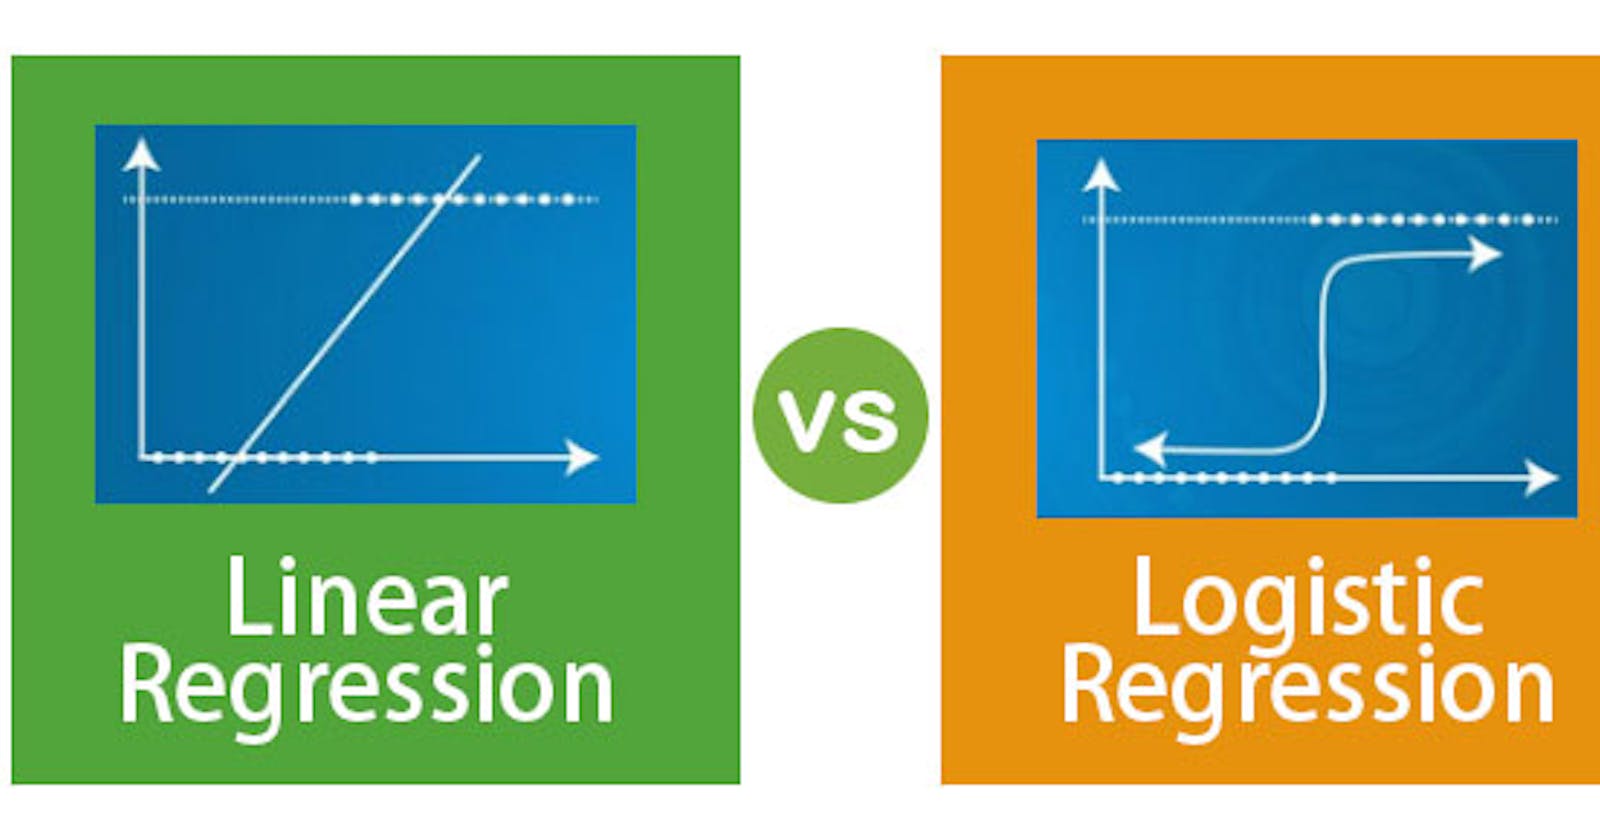 The difference between linear regression and logistic regression